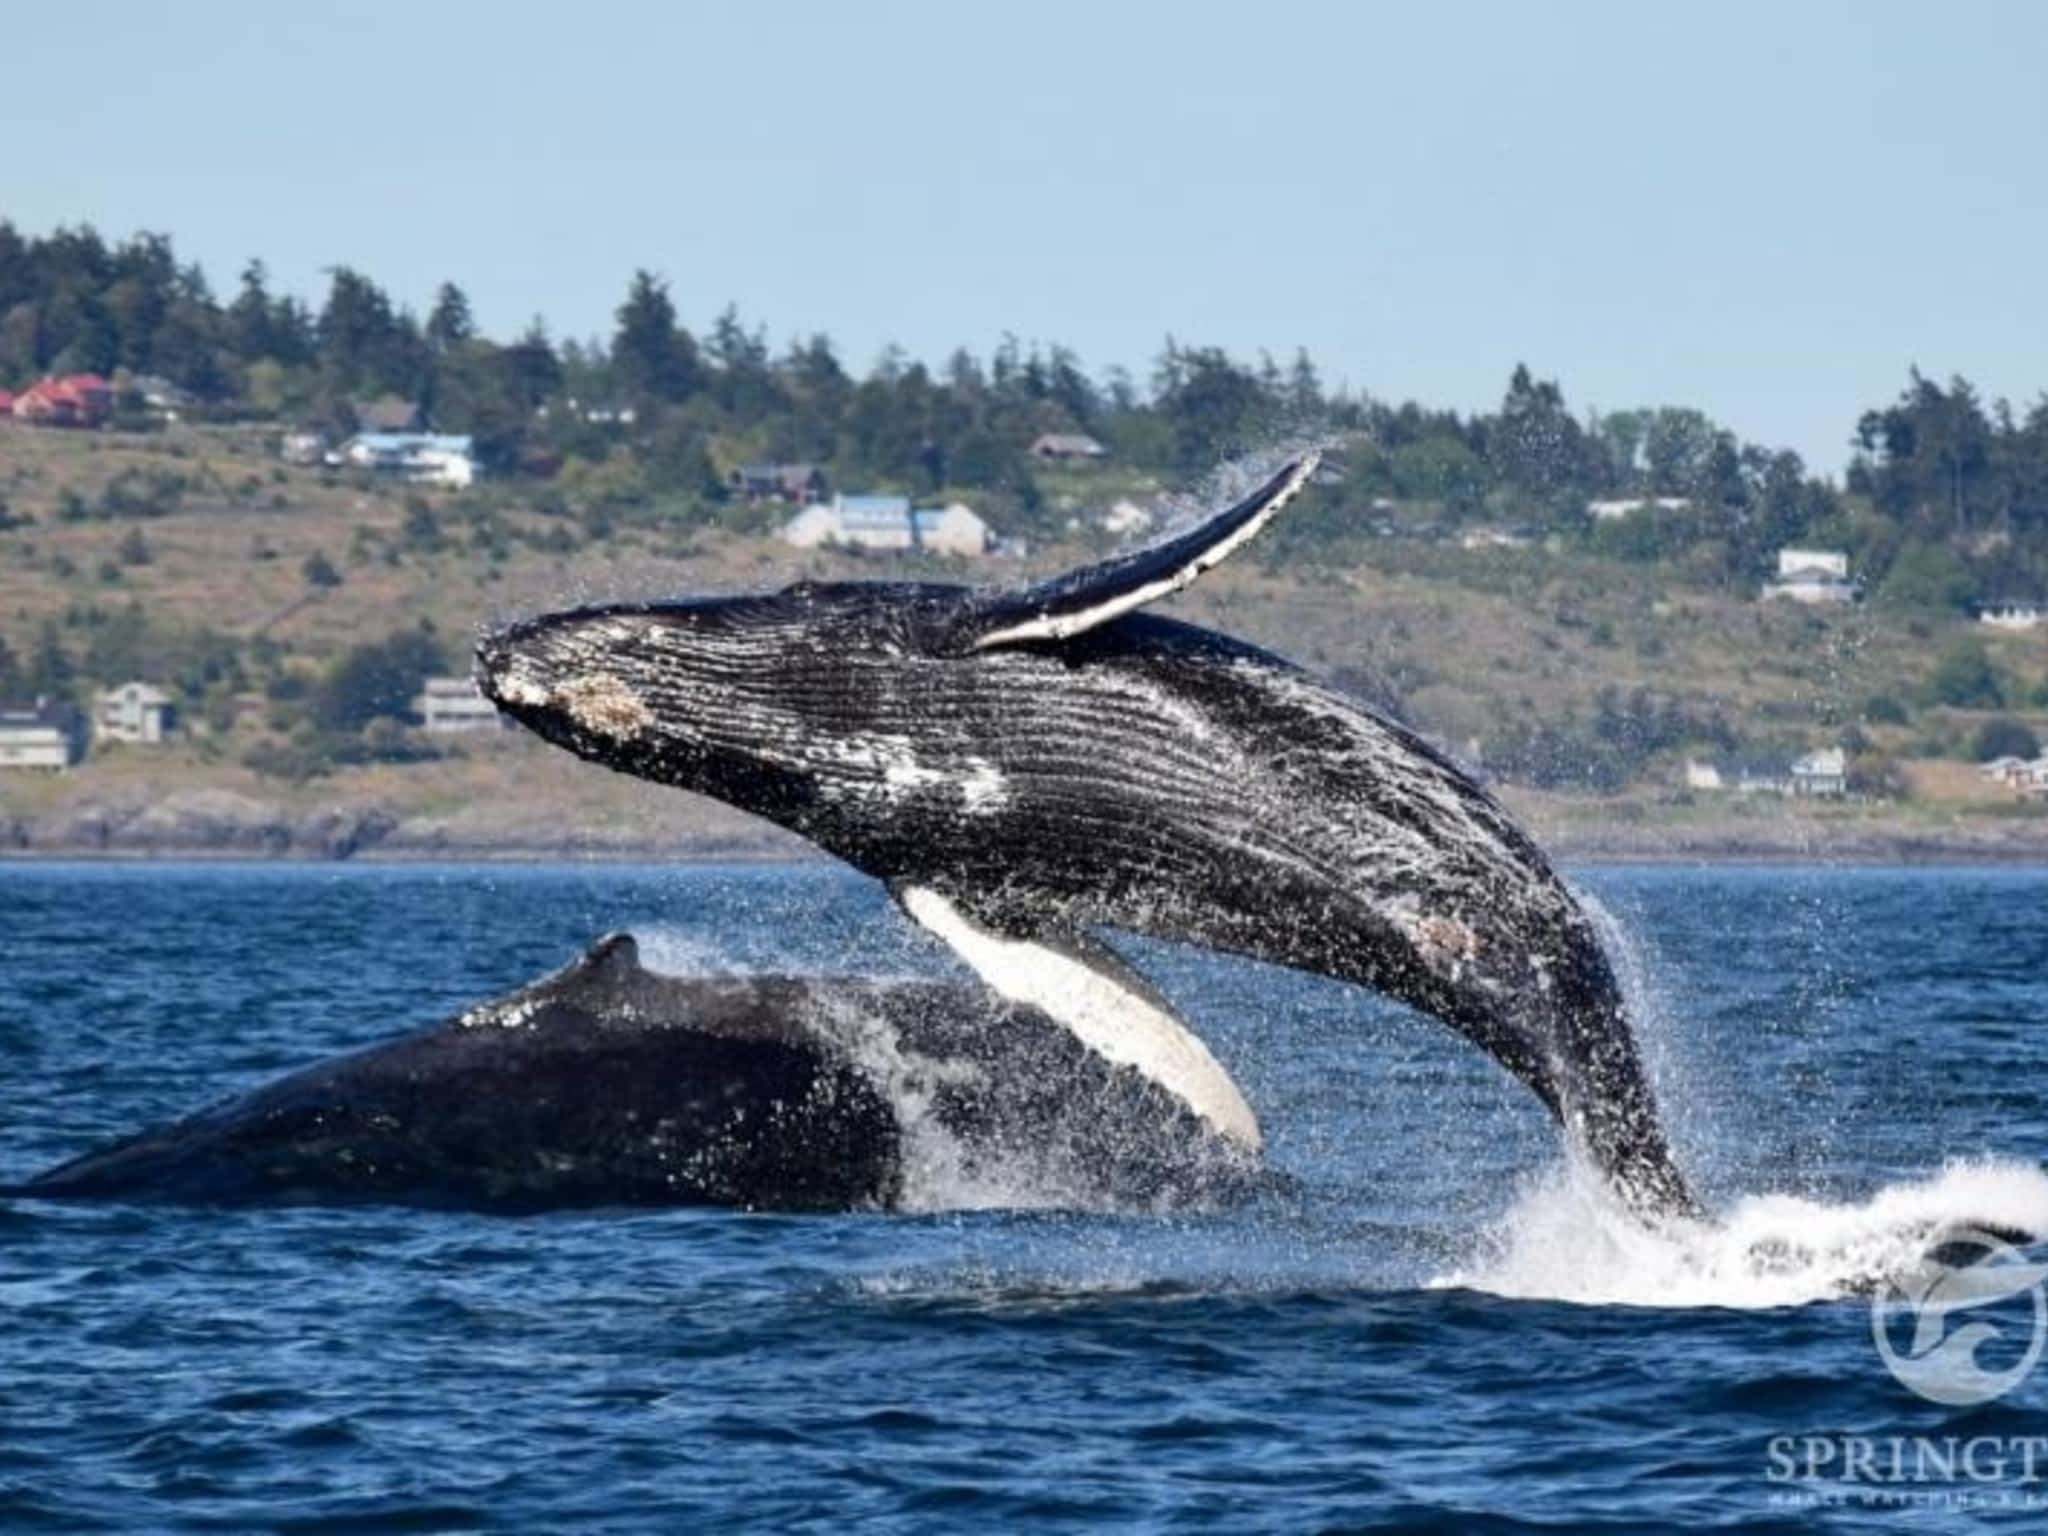 photo Springtide Whale Watching & Eco Tours